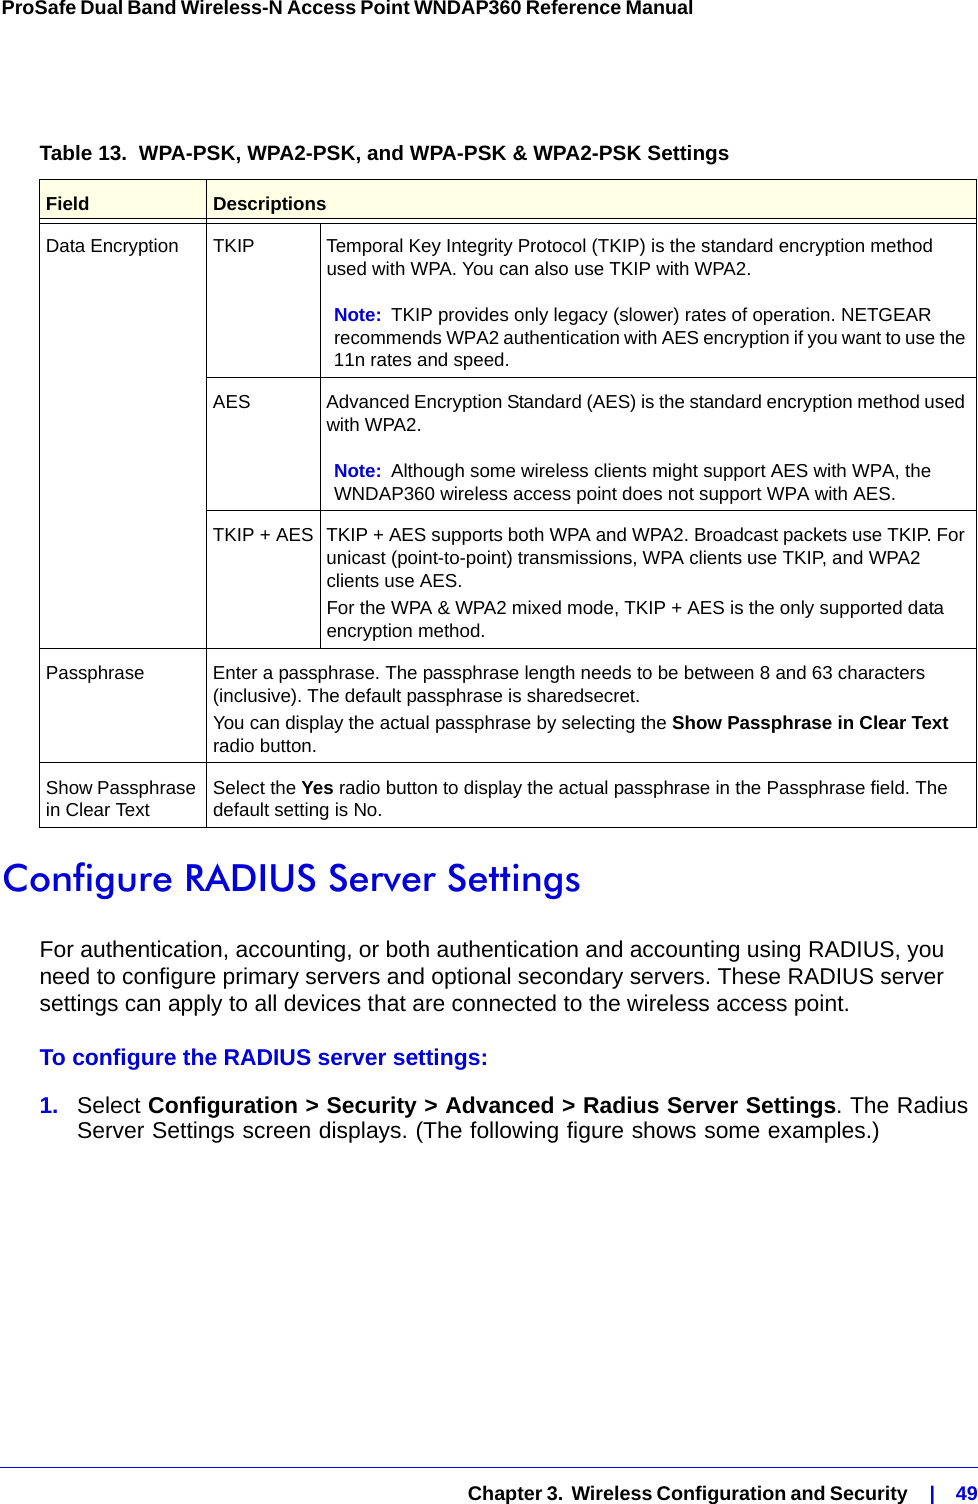   Chapter 3.  Wireless Configuration and Security    |    49ProSafe Dual Band Wireless-N Access Point WNDAP360 Reference Manual Configure RADIUS Server SettingsFor authentication, accounting, or both authentication and accounting using RADIUS, you need to configure primary servers and optional secondary servers. These RADIUS server settings can apply to all devices that are connected to the wireless access point.To configure the RADIUS server settings:1.  Select Configuration &gt; Security &gt; Advanced &gt; Radius Server Settings. The Radius Server Settings screen displays. (The following figure shows some examples.)Table 13.  WPA-PSK, WPA2-PSK, and WPA-PSK &amp; WPA2-PSK Settings Field DescriptionsData Encryption TKIP Temporal Key Integrity Protocol (TKIP) is the standard encryption method used with WPA. You can also use TKIP with WPA2.Note: TKIP provides only legacy (slower) rates of operation. NETGEAR recommends WPA2 authentication with AES encryption if you want to use the 11n rates and speed. AES Advanced Encryption Standard (AES) is the standard encryption method used with WPA2.Note: Although some wireless clients might support AES with WPA, the WNDAP360 wireless access point does not support WPA with AES.TKIP + AES TKIP + AES supports both WPA and WPA2. Broadcast packets use TKIP. For unicast (point-to-point) transmissions, WPA clients use TKIP, and WPA2 clients use AES.For the WPA &amp; WPA2 mixed mode, TKIP + AES is the only supported data encryption method.Passphrase Enter a passphrase. The passphrase length needs to be between 8 and 63 characters (inclusive). The default passphrase is sharedsecret.You can display the actual passphrase by selecting the Show Passphrase in Clear Text radio button. Show Passphrase in Clear Text Select the Yes radio button to display the actual passphrase in the Passphrase field. The default setting is No.